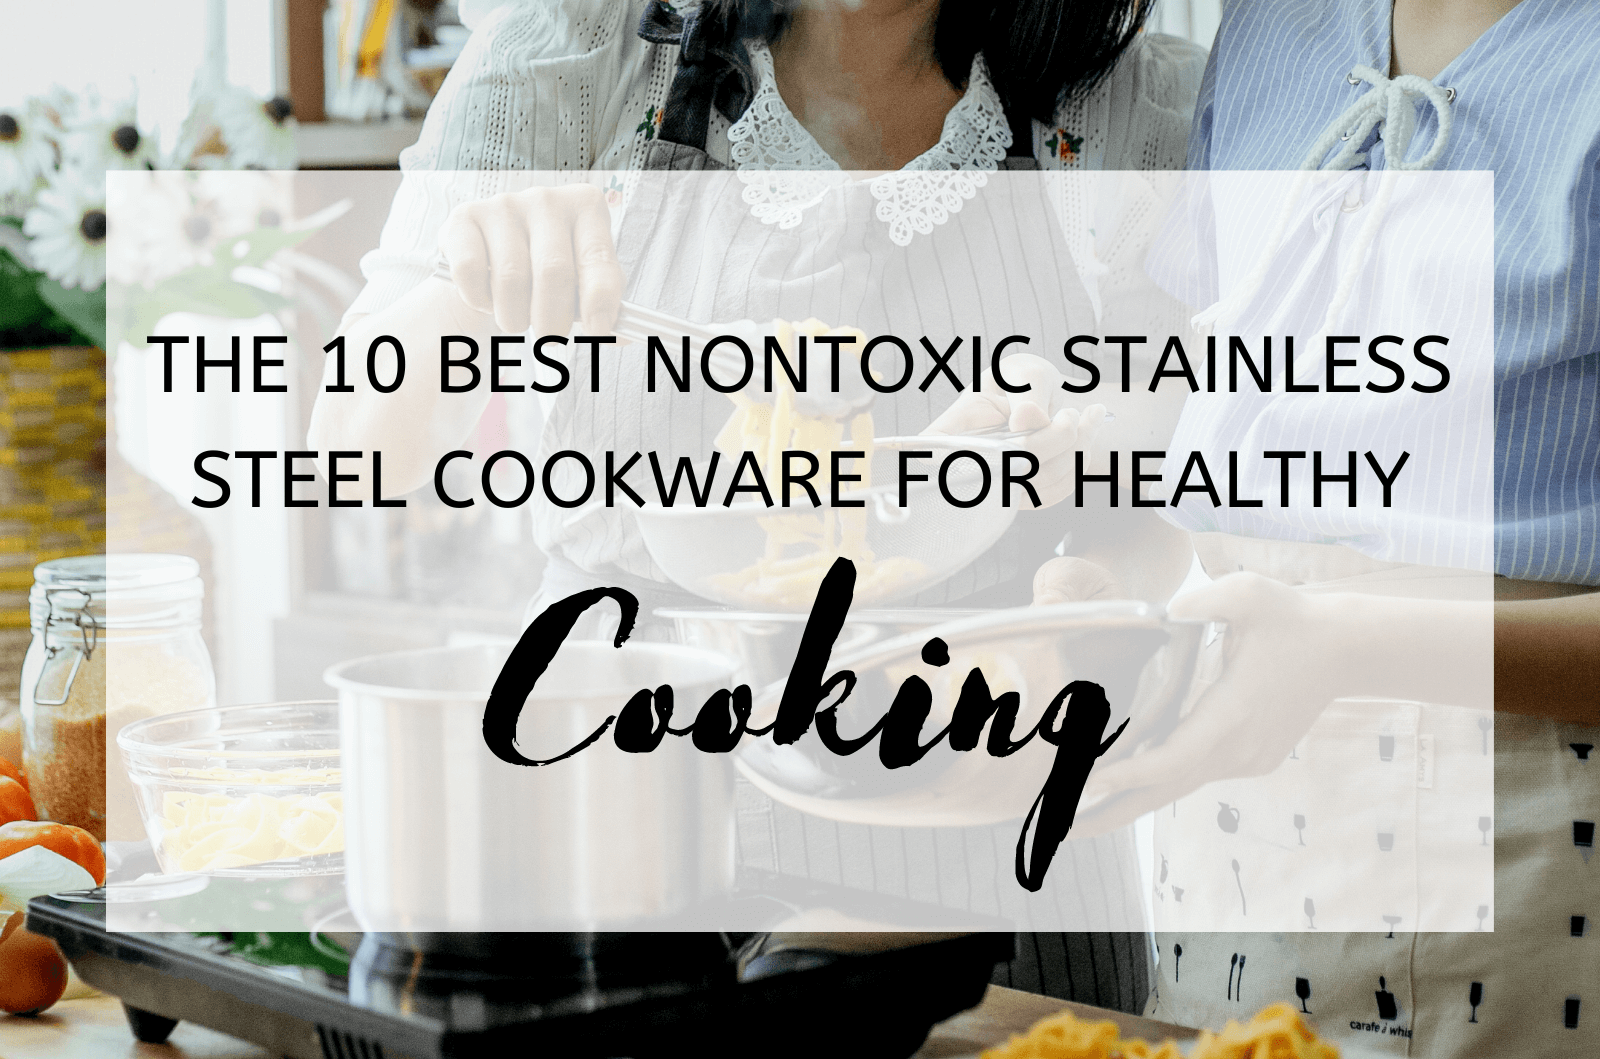 The 10 Best Nontoxic Stainless Steel Cookware For Healthy Cooking